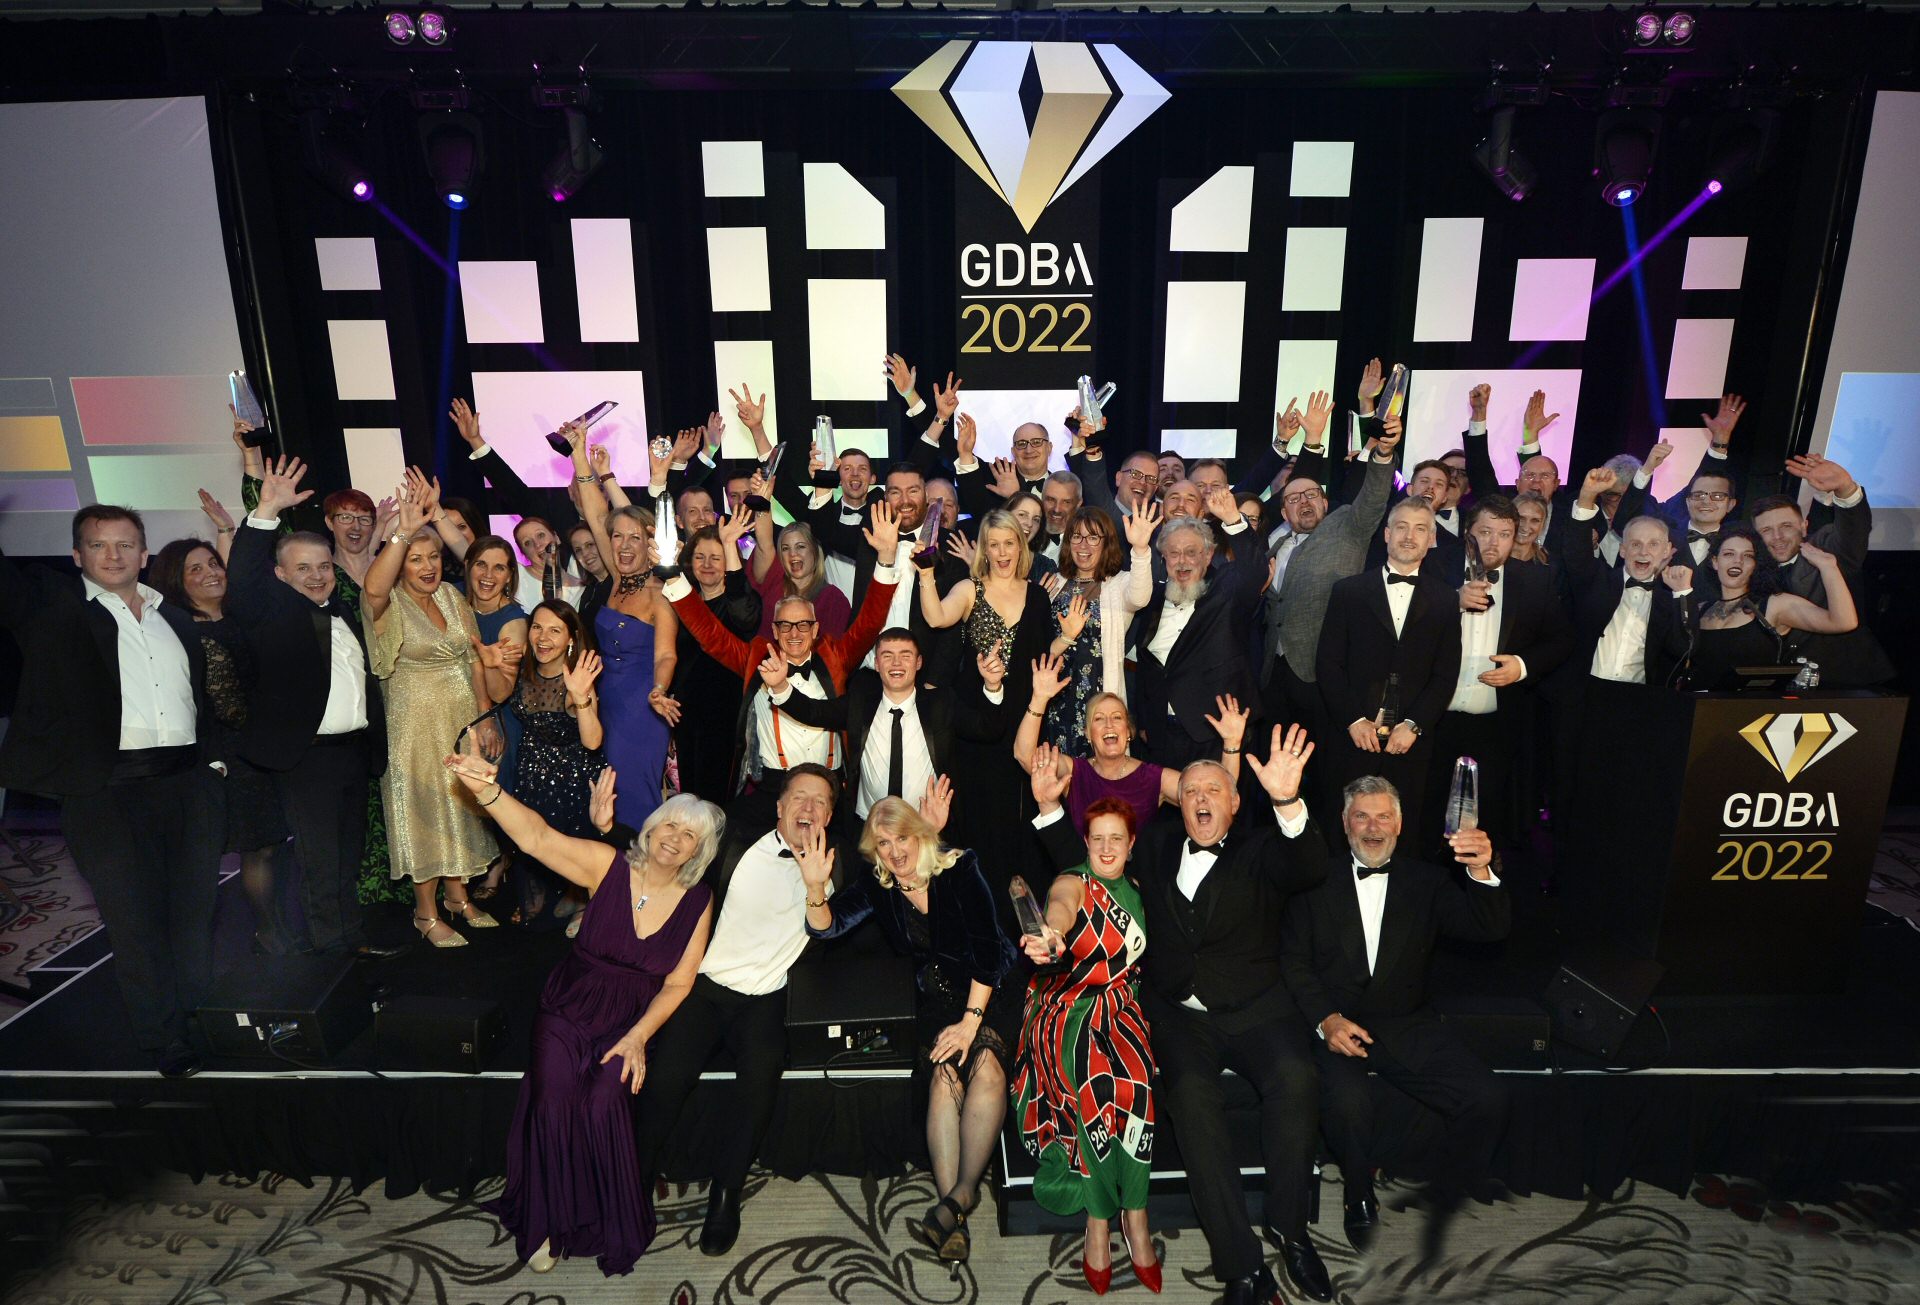 The Winners of the Gatwick Diamond Business Awards 2022 are announced!